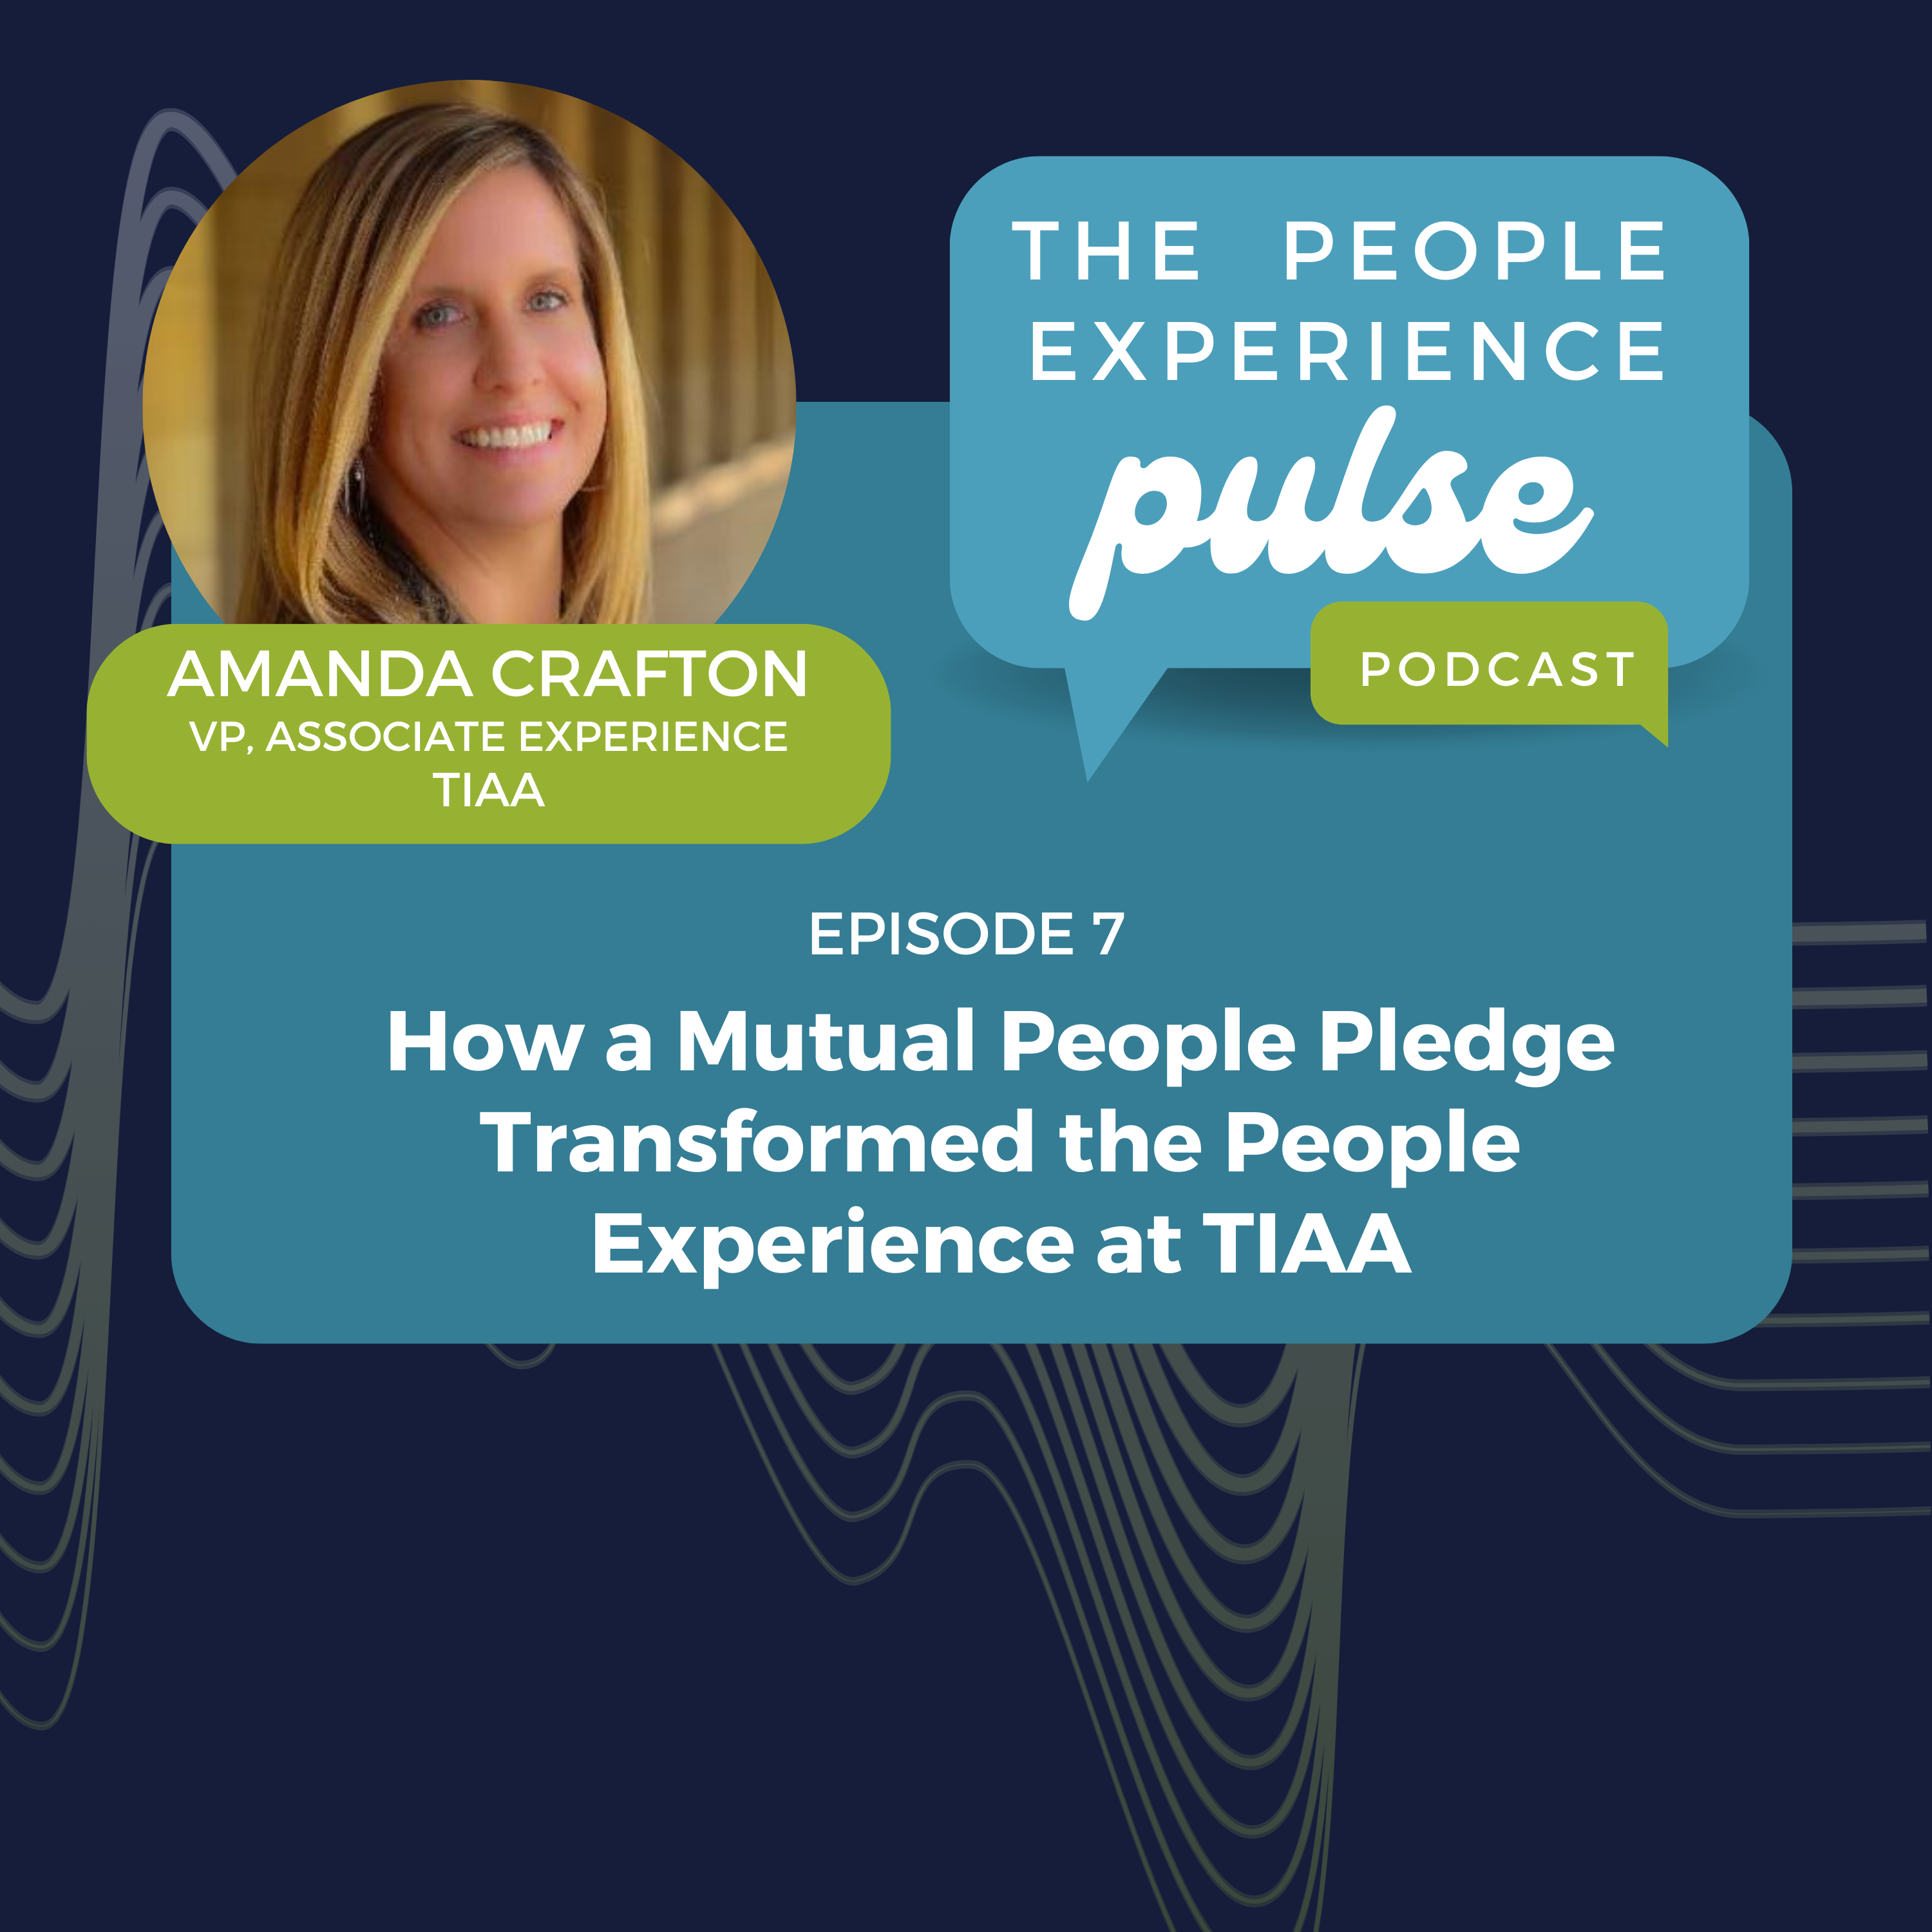 Episode 7: How a Mutual People Pledge Transformed the People Experience at TIAA with Amanda Crafton